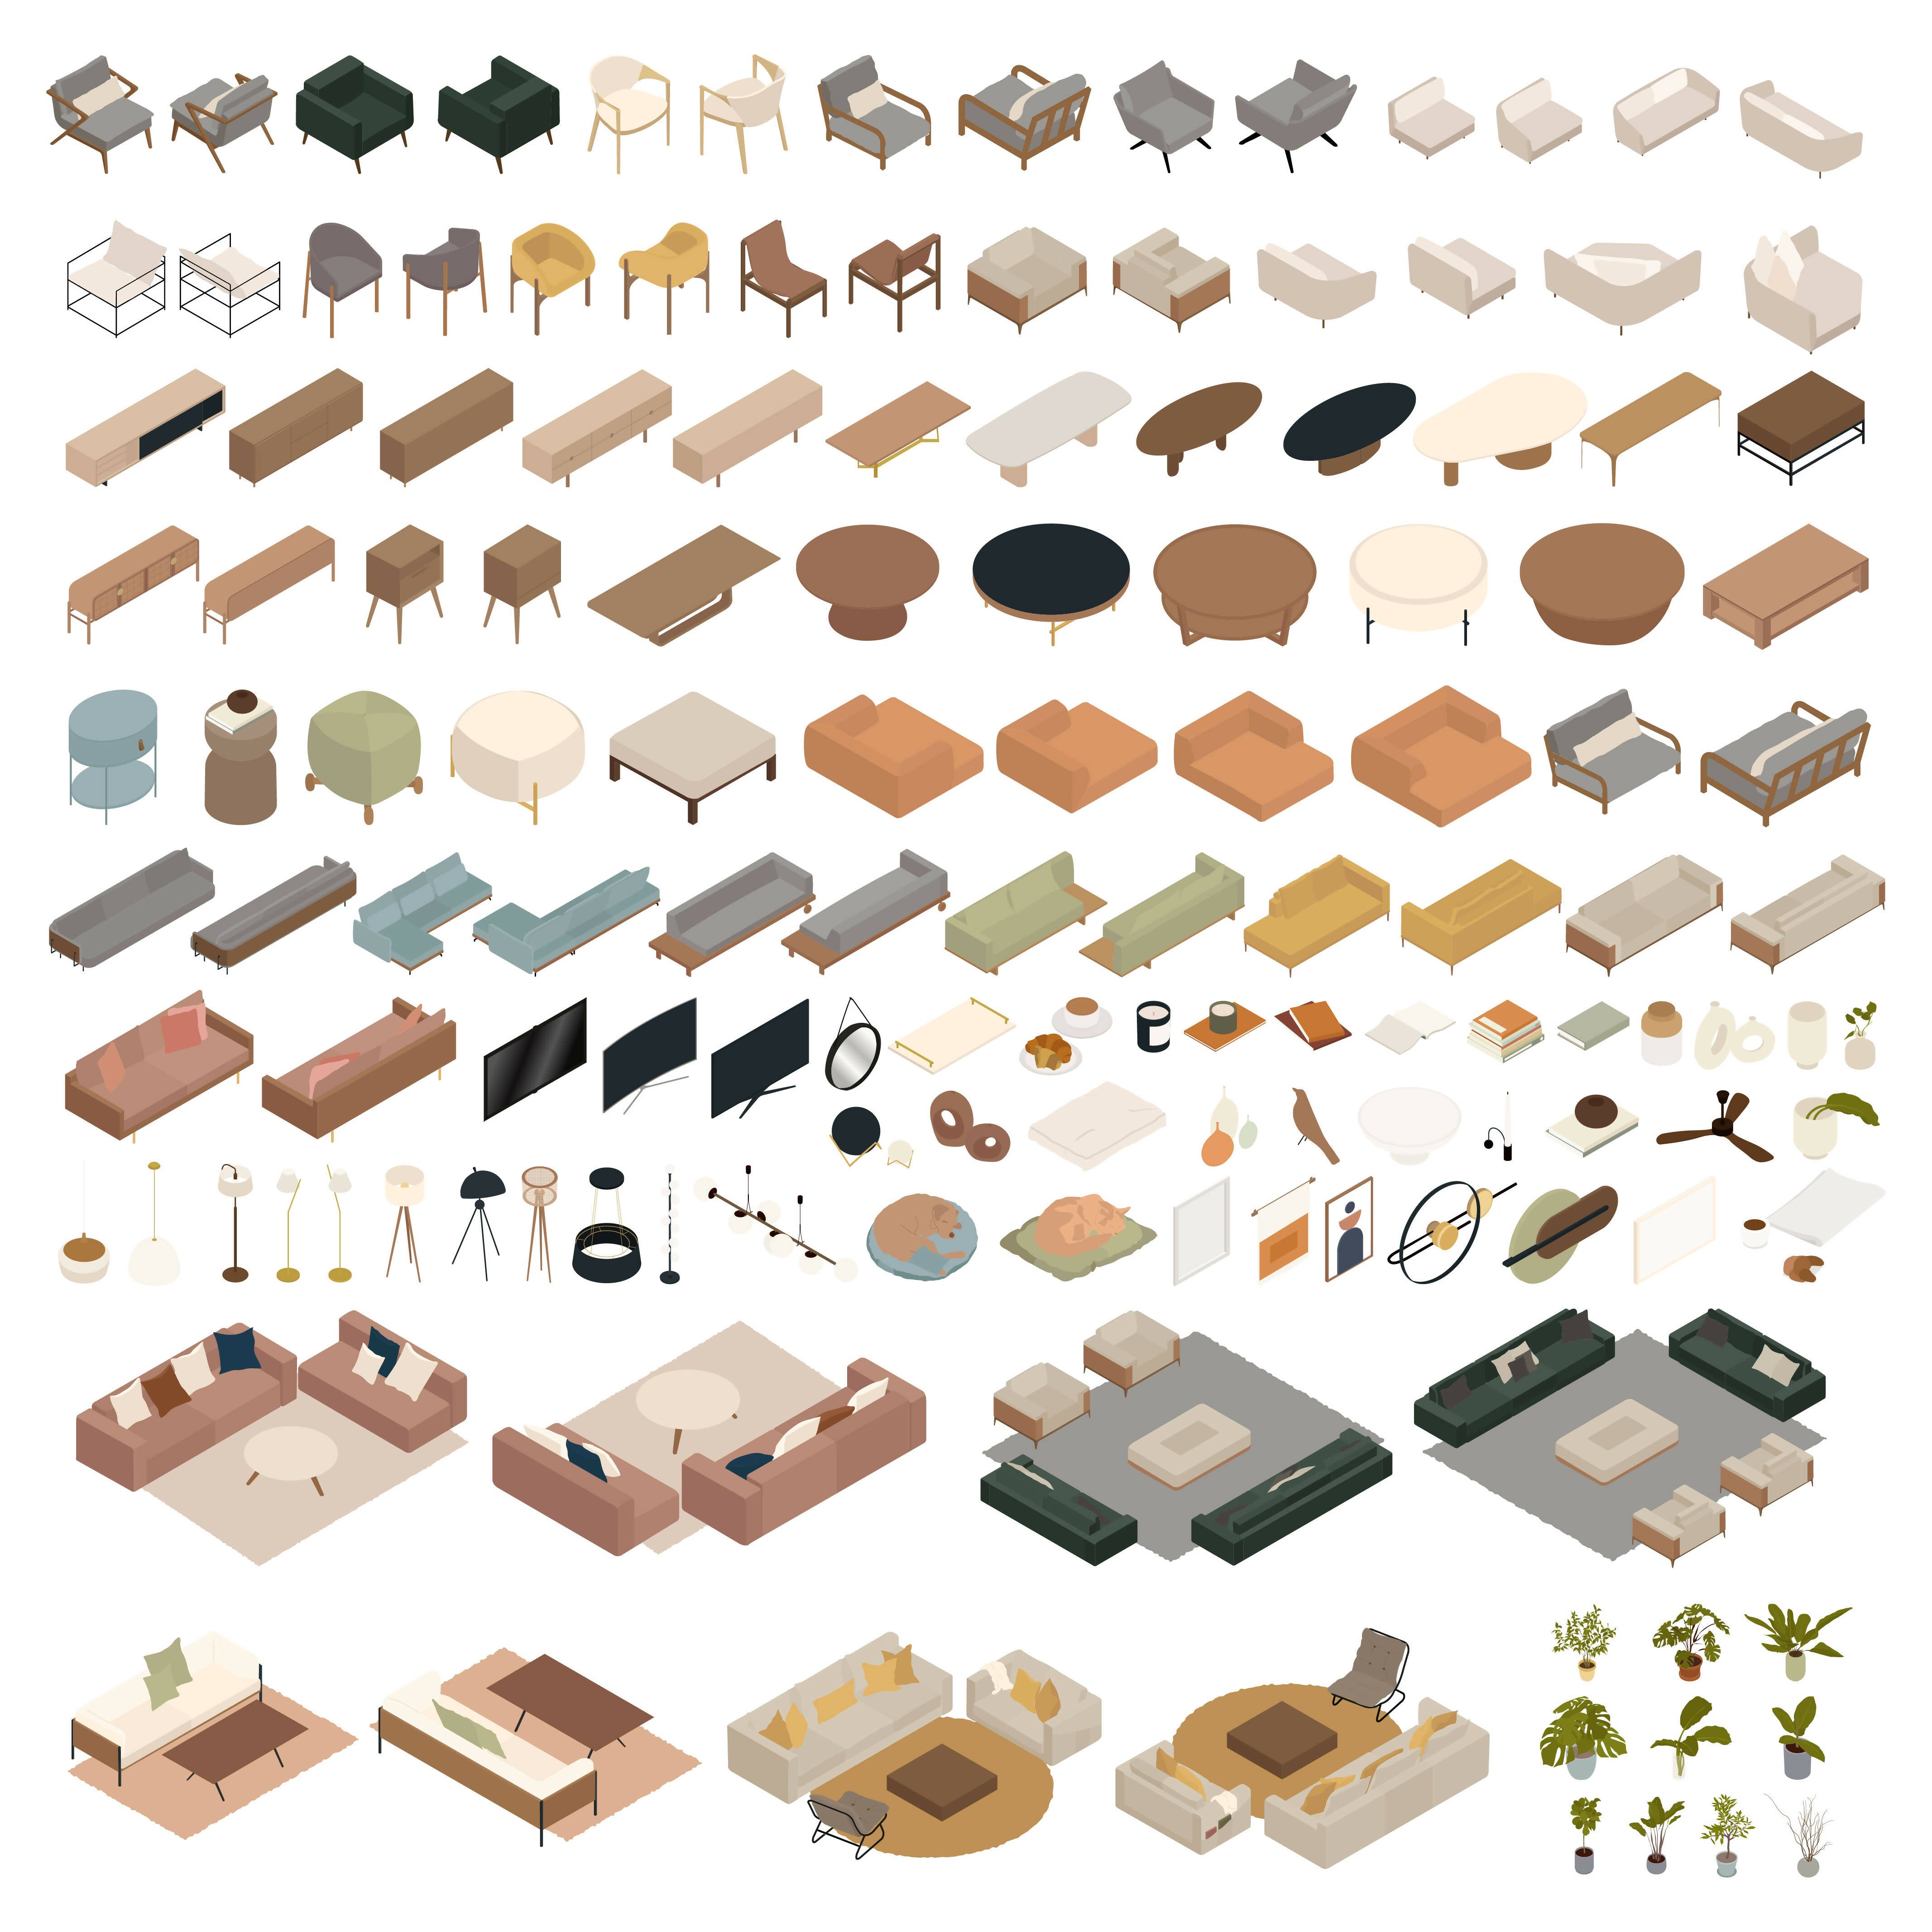 Isometric Living Room Library (140 figures) | Learn Architecture Online